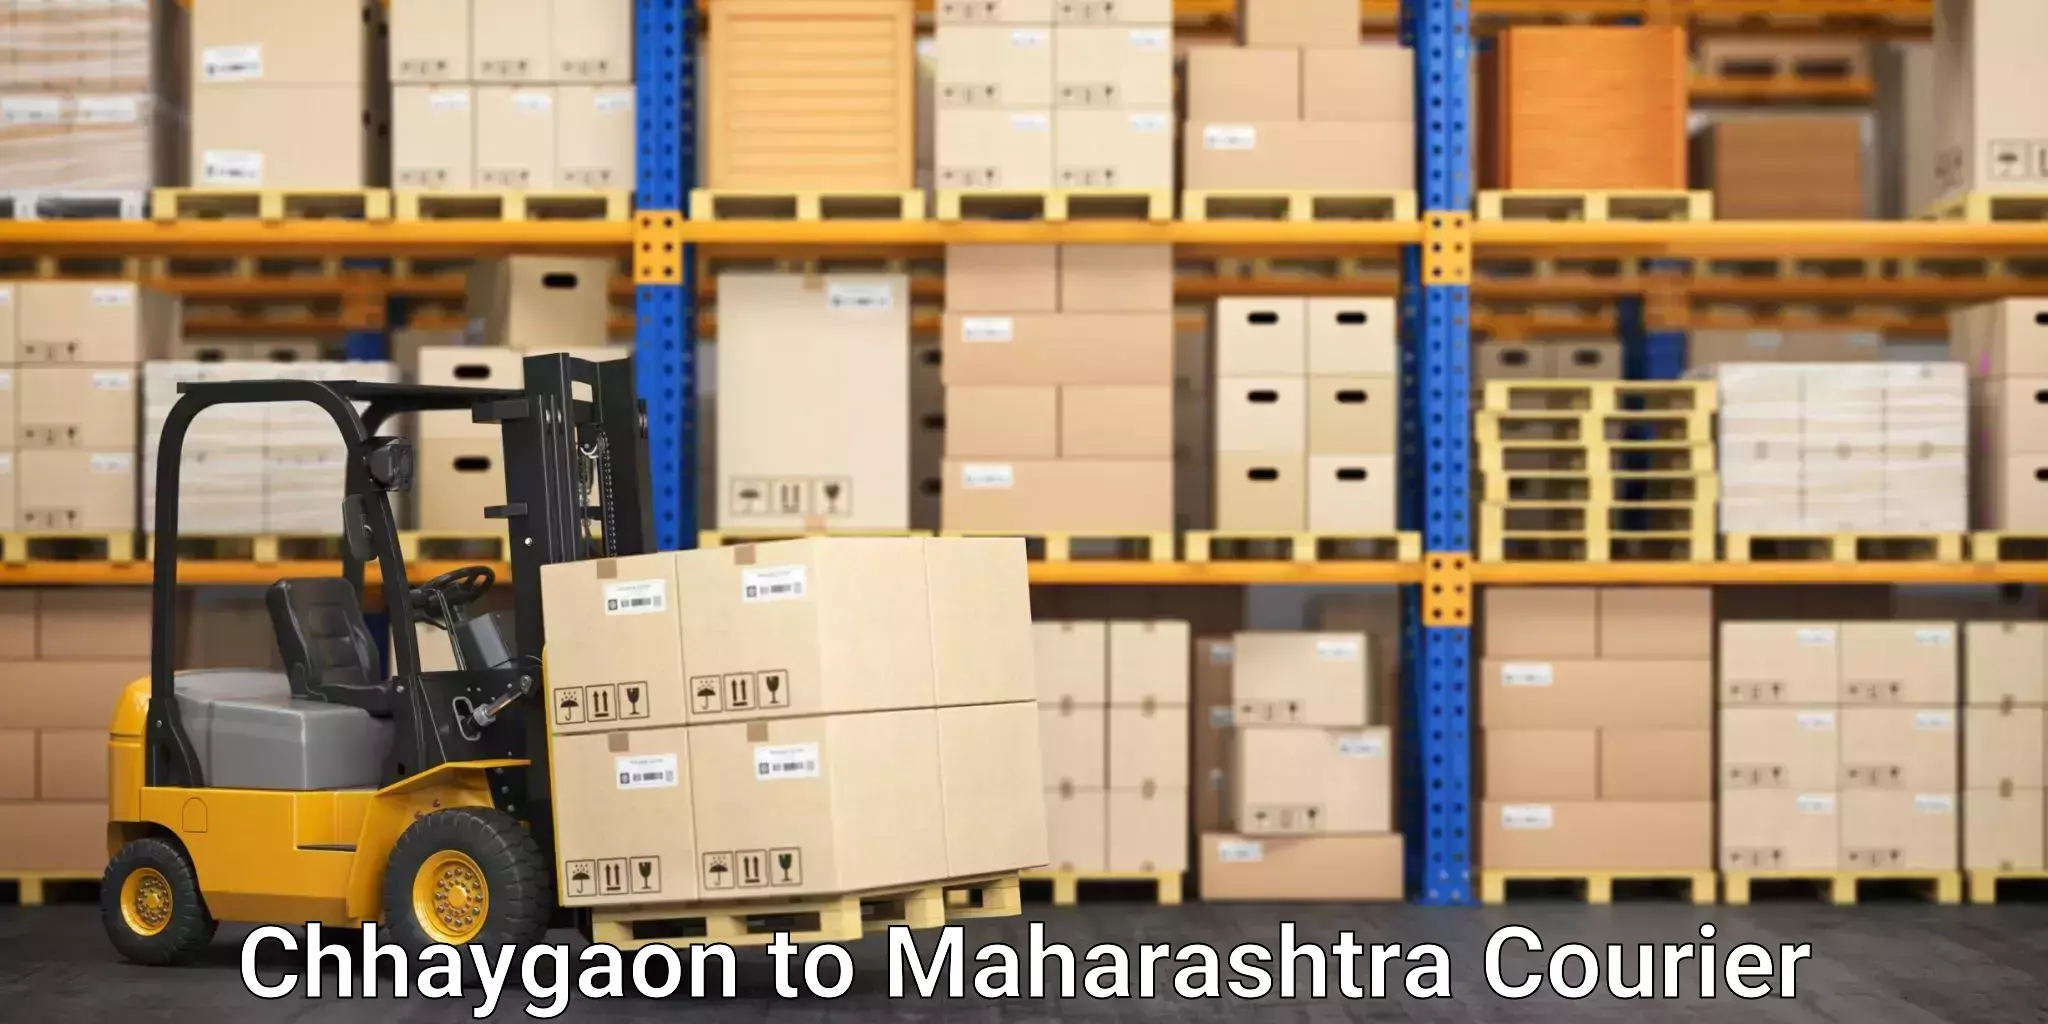 Premium courier services Chhaygaon to Virar